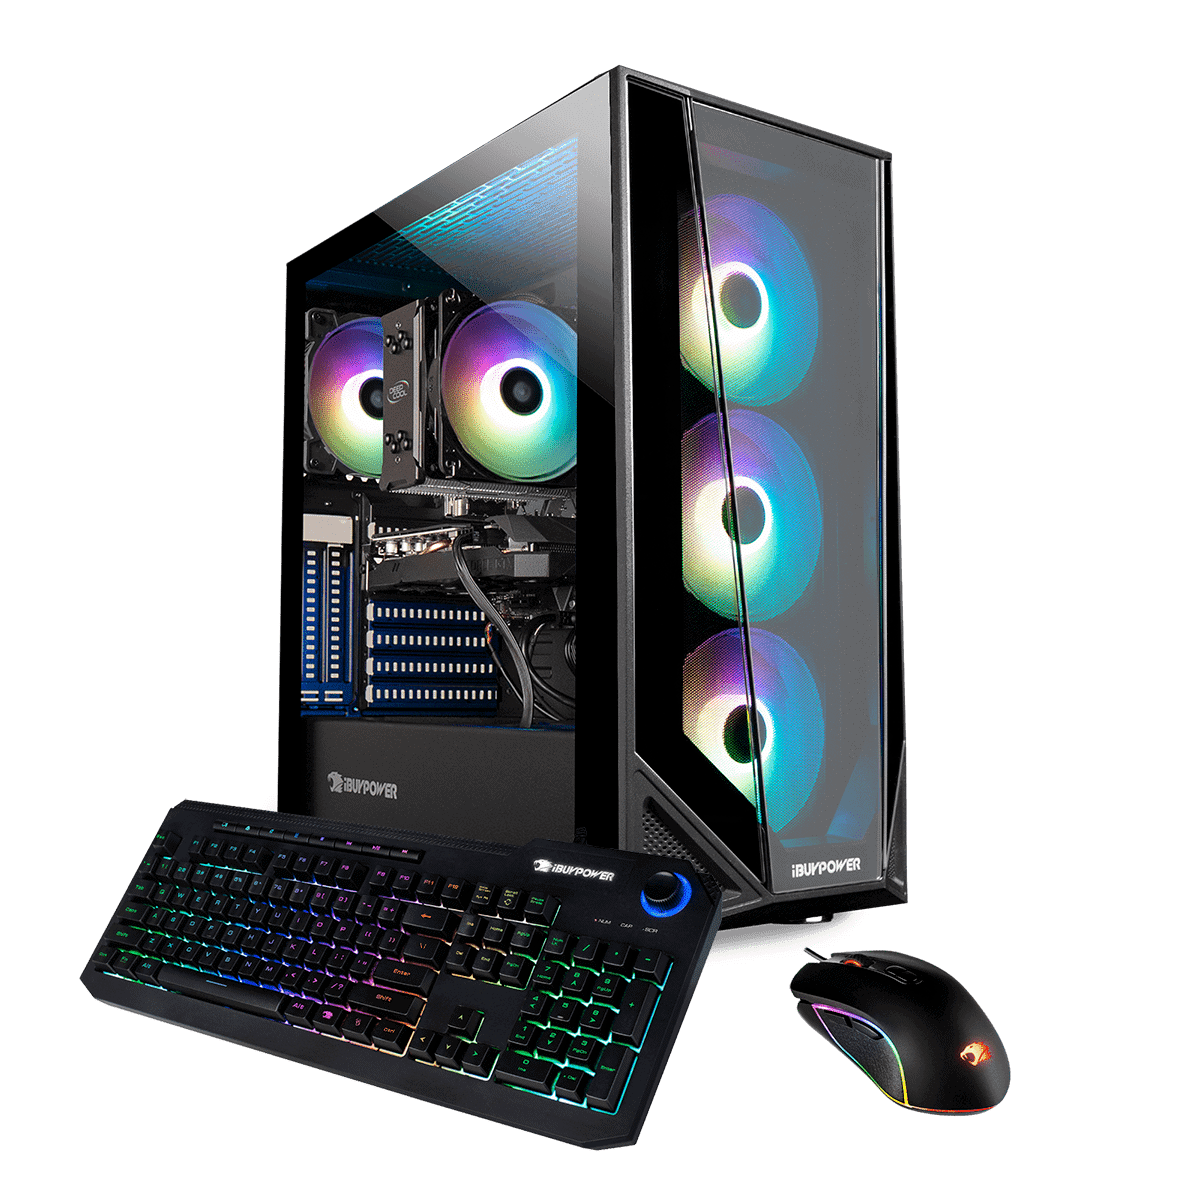 Corner How Much Does A Good Prebuilt Gaming Pc Cost for Streaming